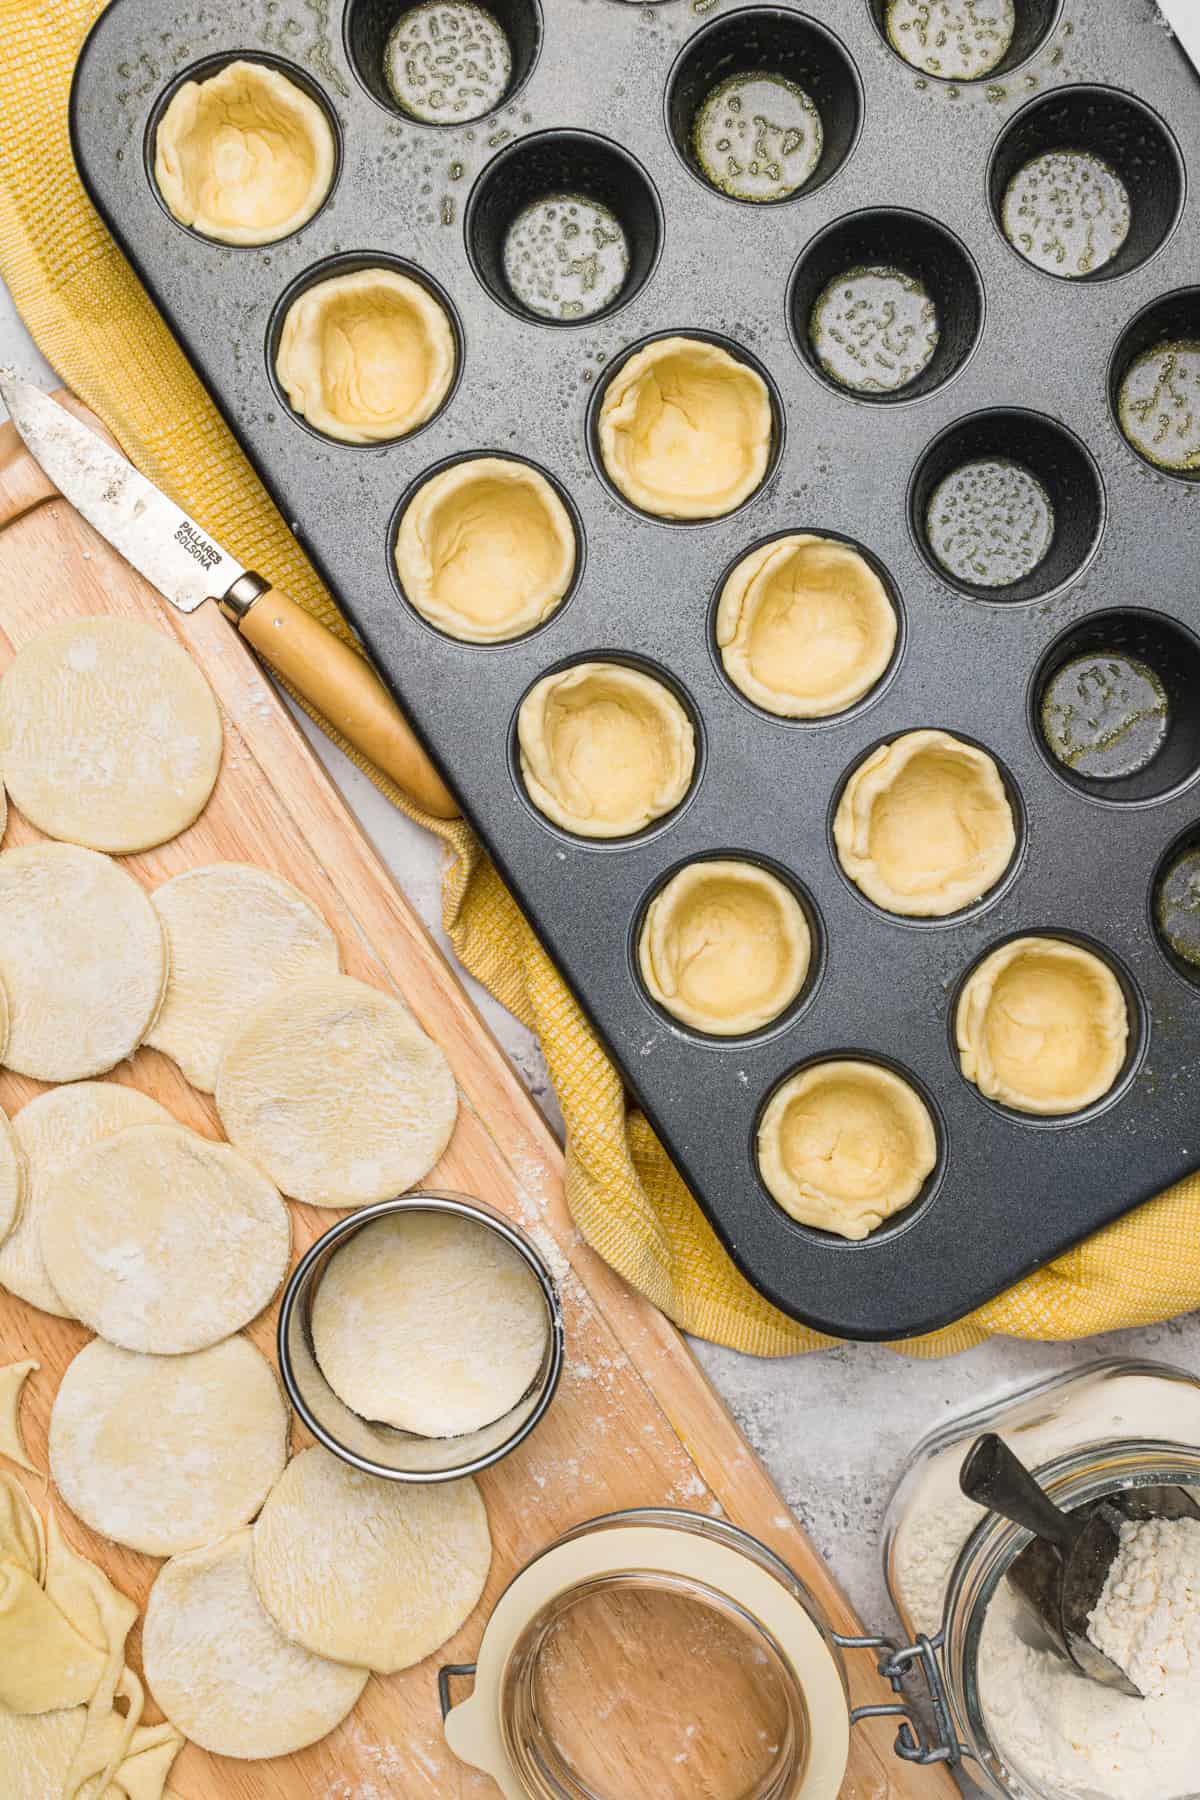 Wooden cutting board with pie crust circles on it next to a mini muffin pan that has been sprayed with oil. A few of the muffin tin cups already have pie crust circles pushed into them.